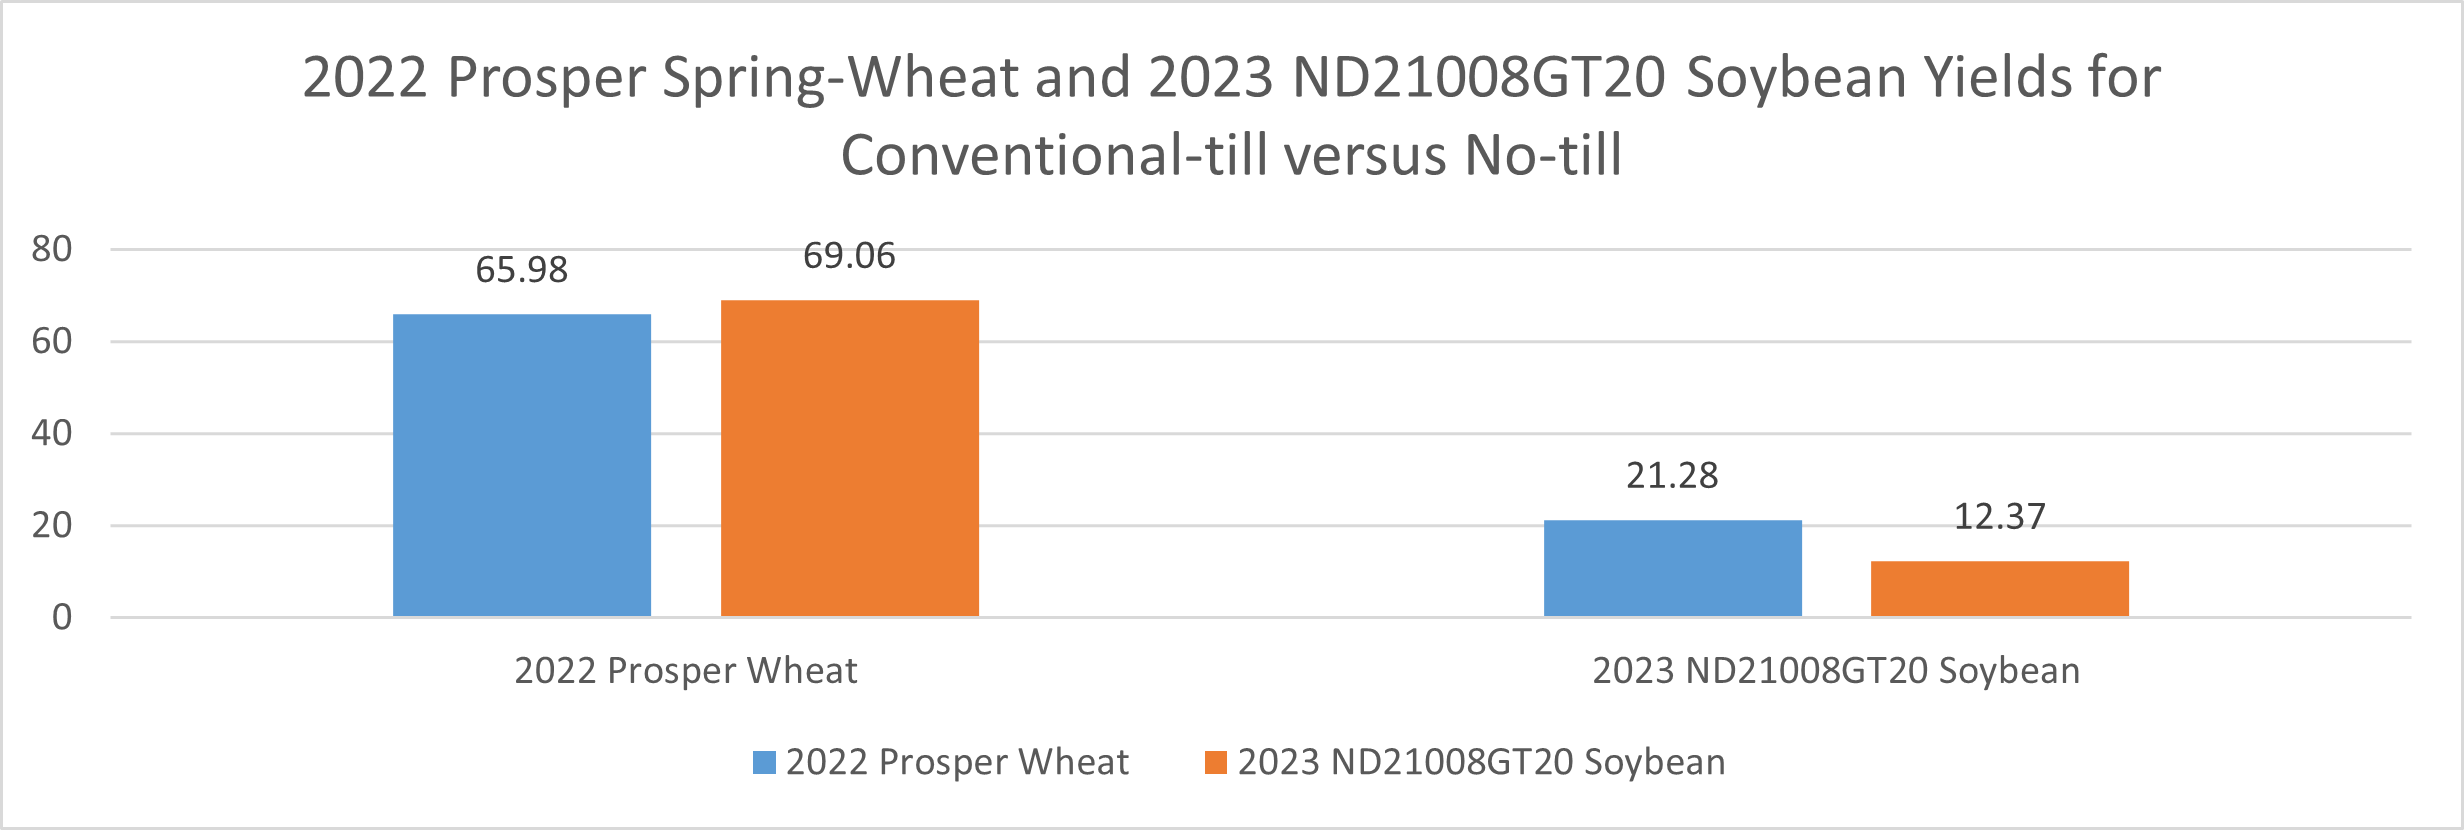 The Langdon Research Extension Center conventional-till versus no-till demonstration 2022 Prosper Wheat and 2023 ND21008GT 20 soybeans yield comparisons.